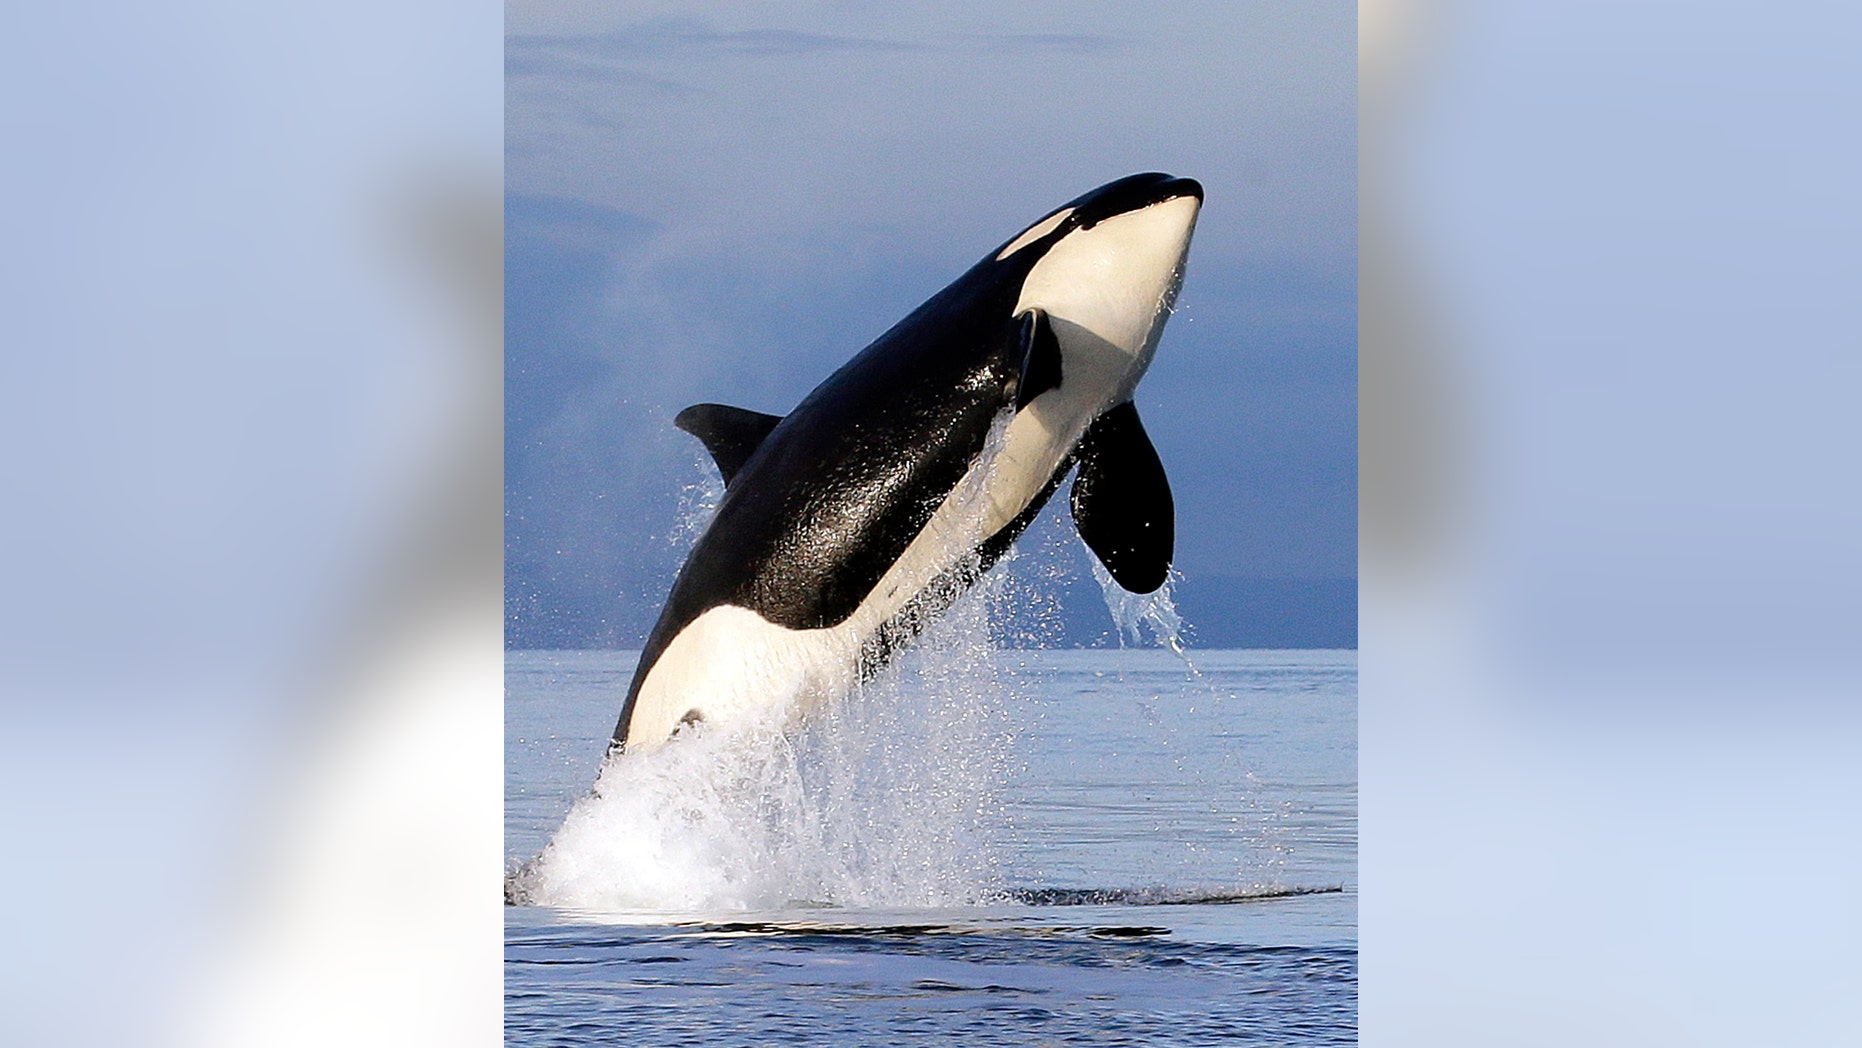 Dismal outlook for Puget Sound orcas as 2 more likely to die by summer